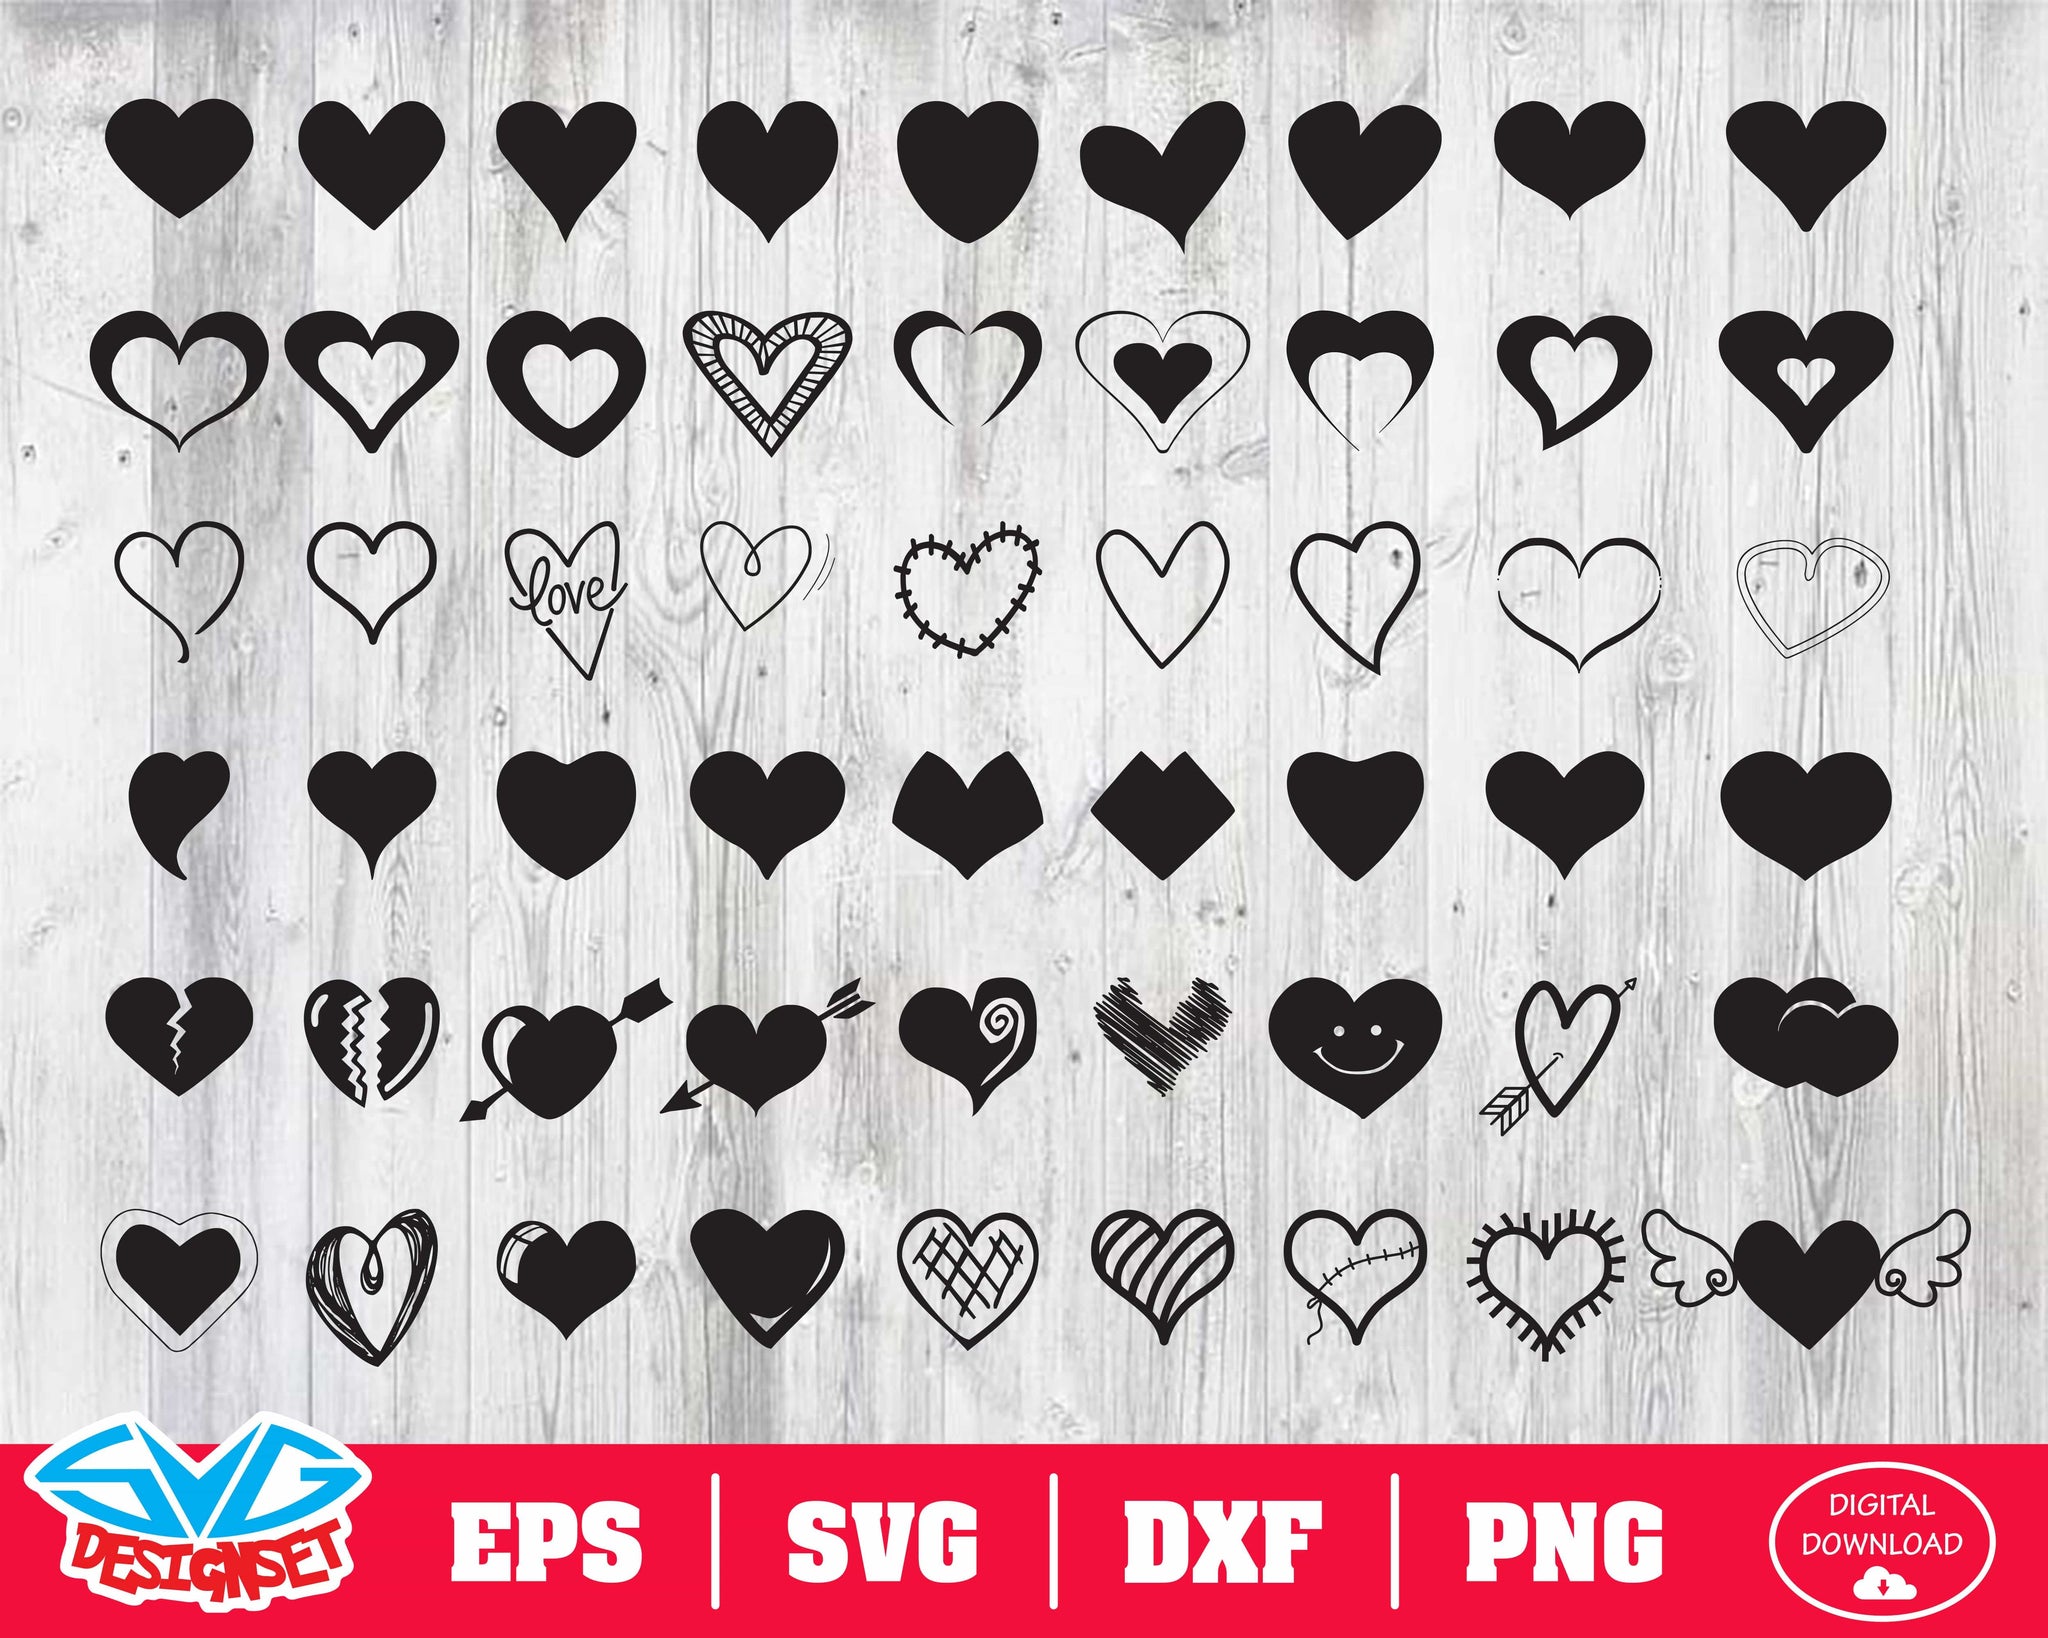 Heart Svg, Dxf, Eps, Png, Clipart, Silhouette and Cutfiles #1 - SVGDesignSets